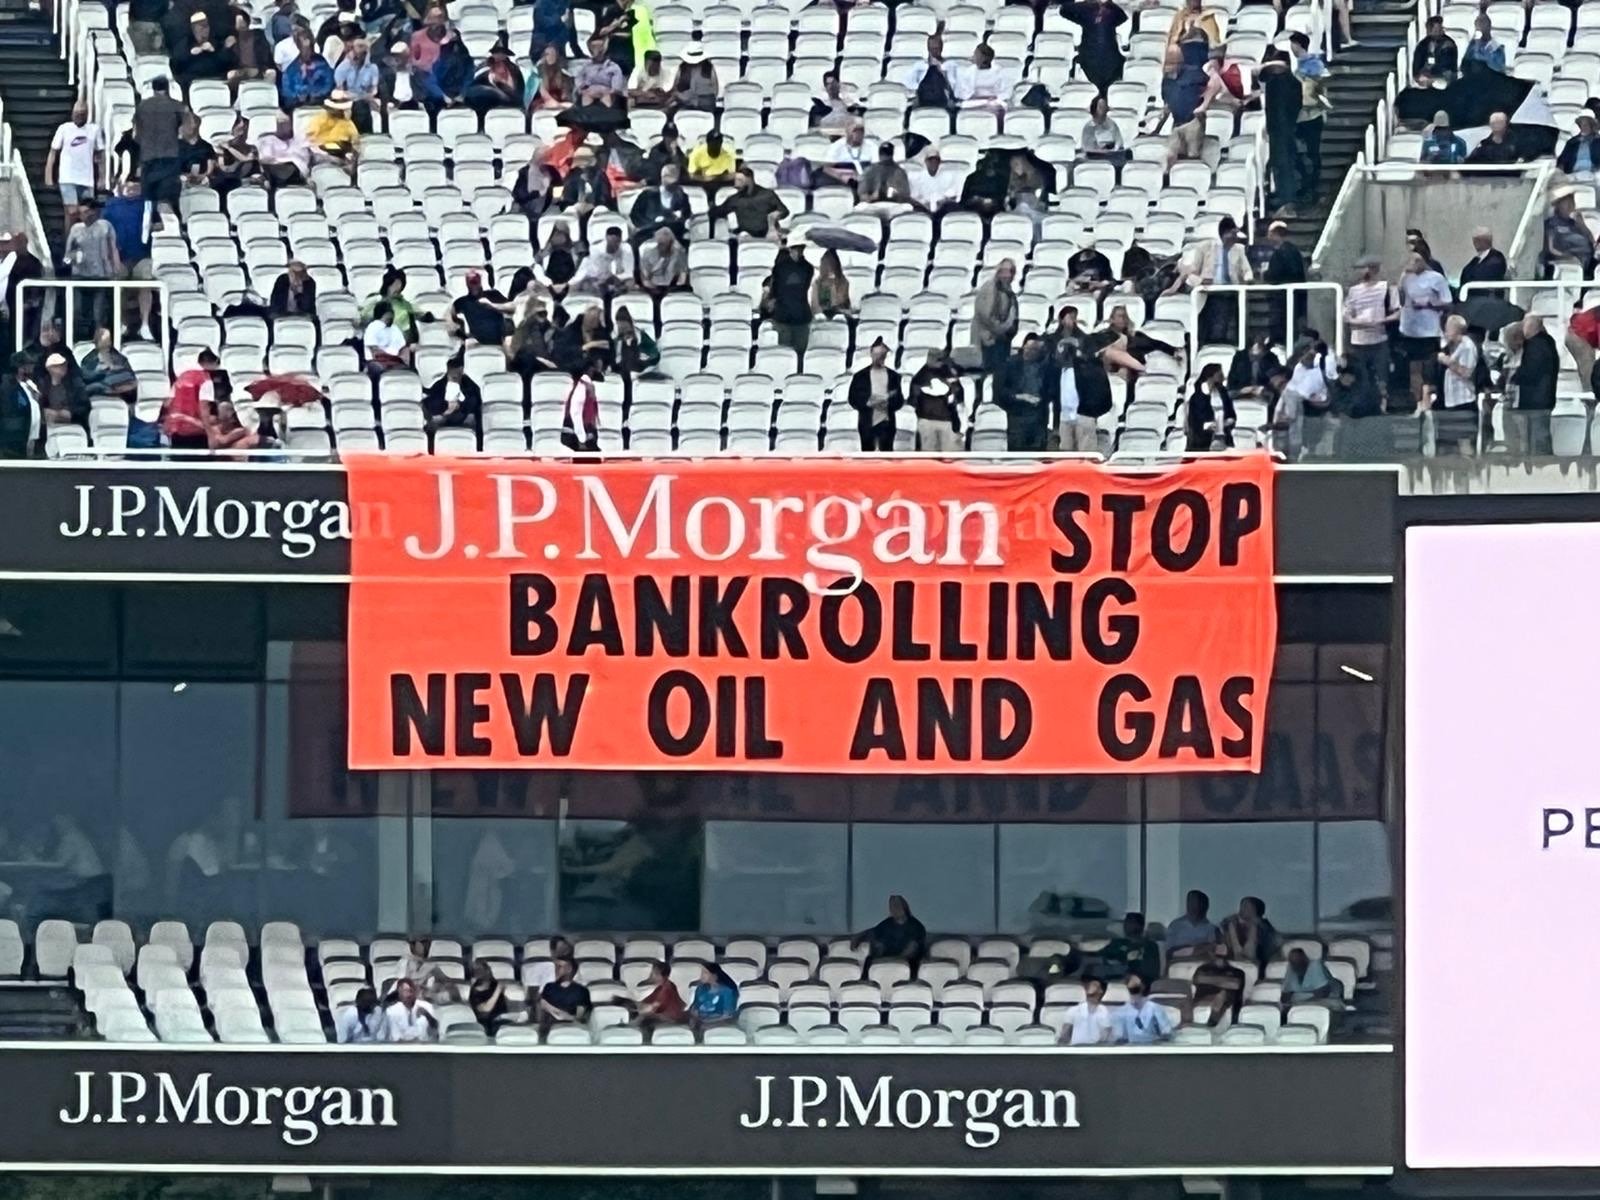 BREAKING: Doctors for XR drop banner at Lords reading ‘JP Morgan: Stop Bankrolling New Oil and Gas’